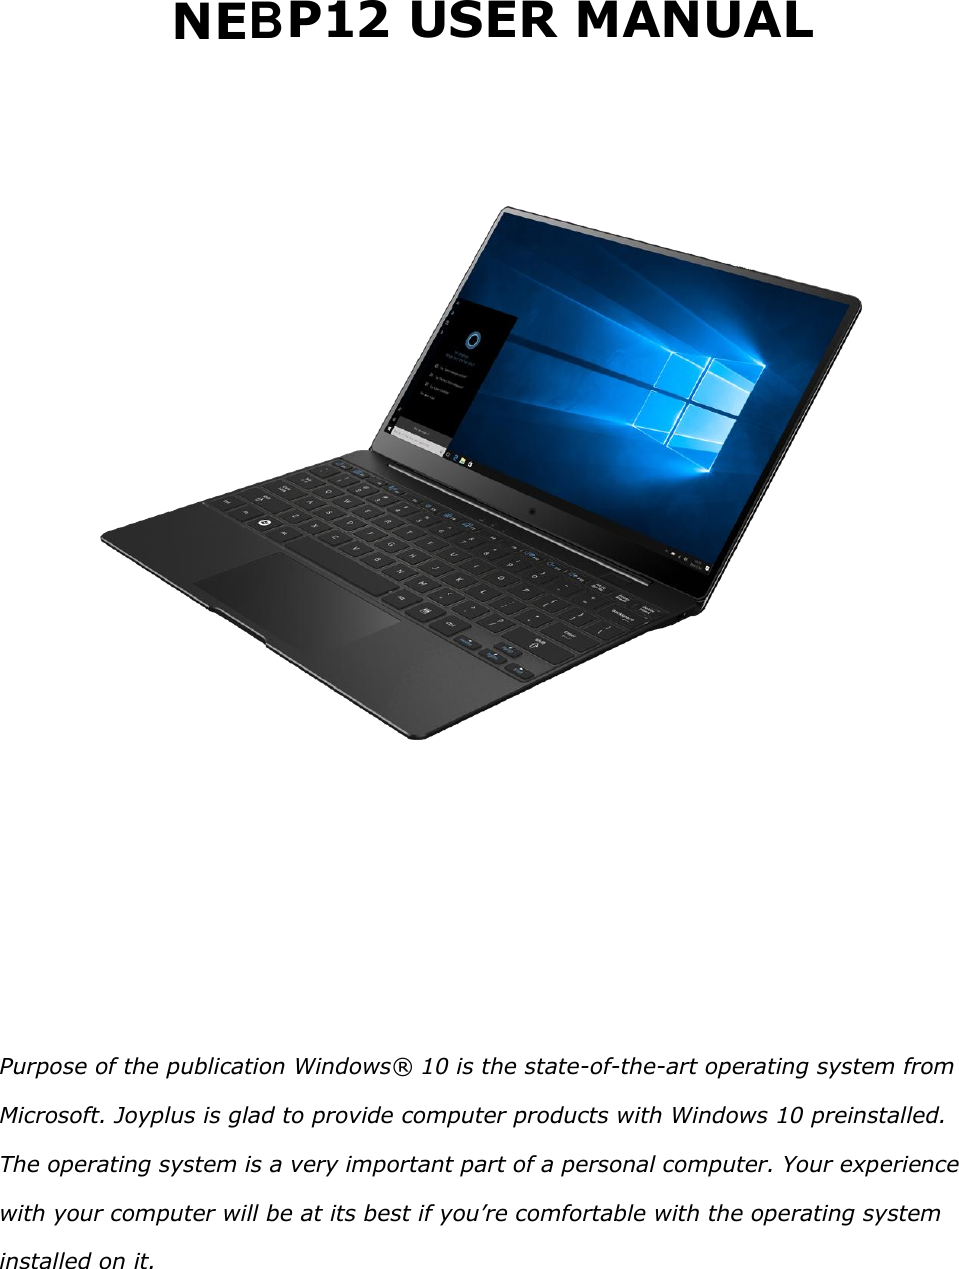   NE 2 USER MANUAL           Purpose of the publication Windows® 10 is the state-of-the-art operating system from Microsoft. Joyplus is glad to provide computer products with Windows 10 preinstalled. The operating system is a very important part of a personal computer. Your experience with your computer will be at its best if you’re comfortable with the operating system installed on it.    P1B